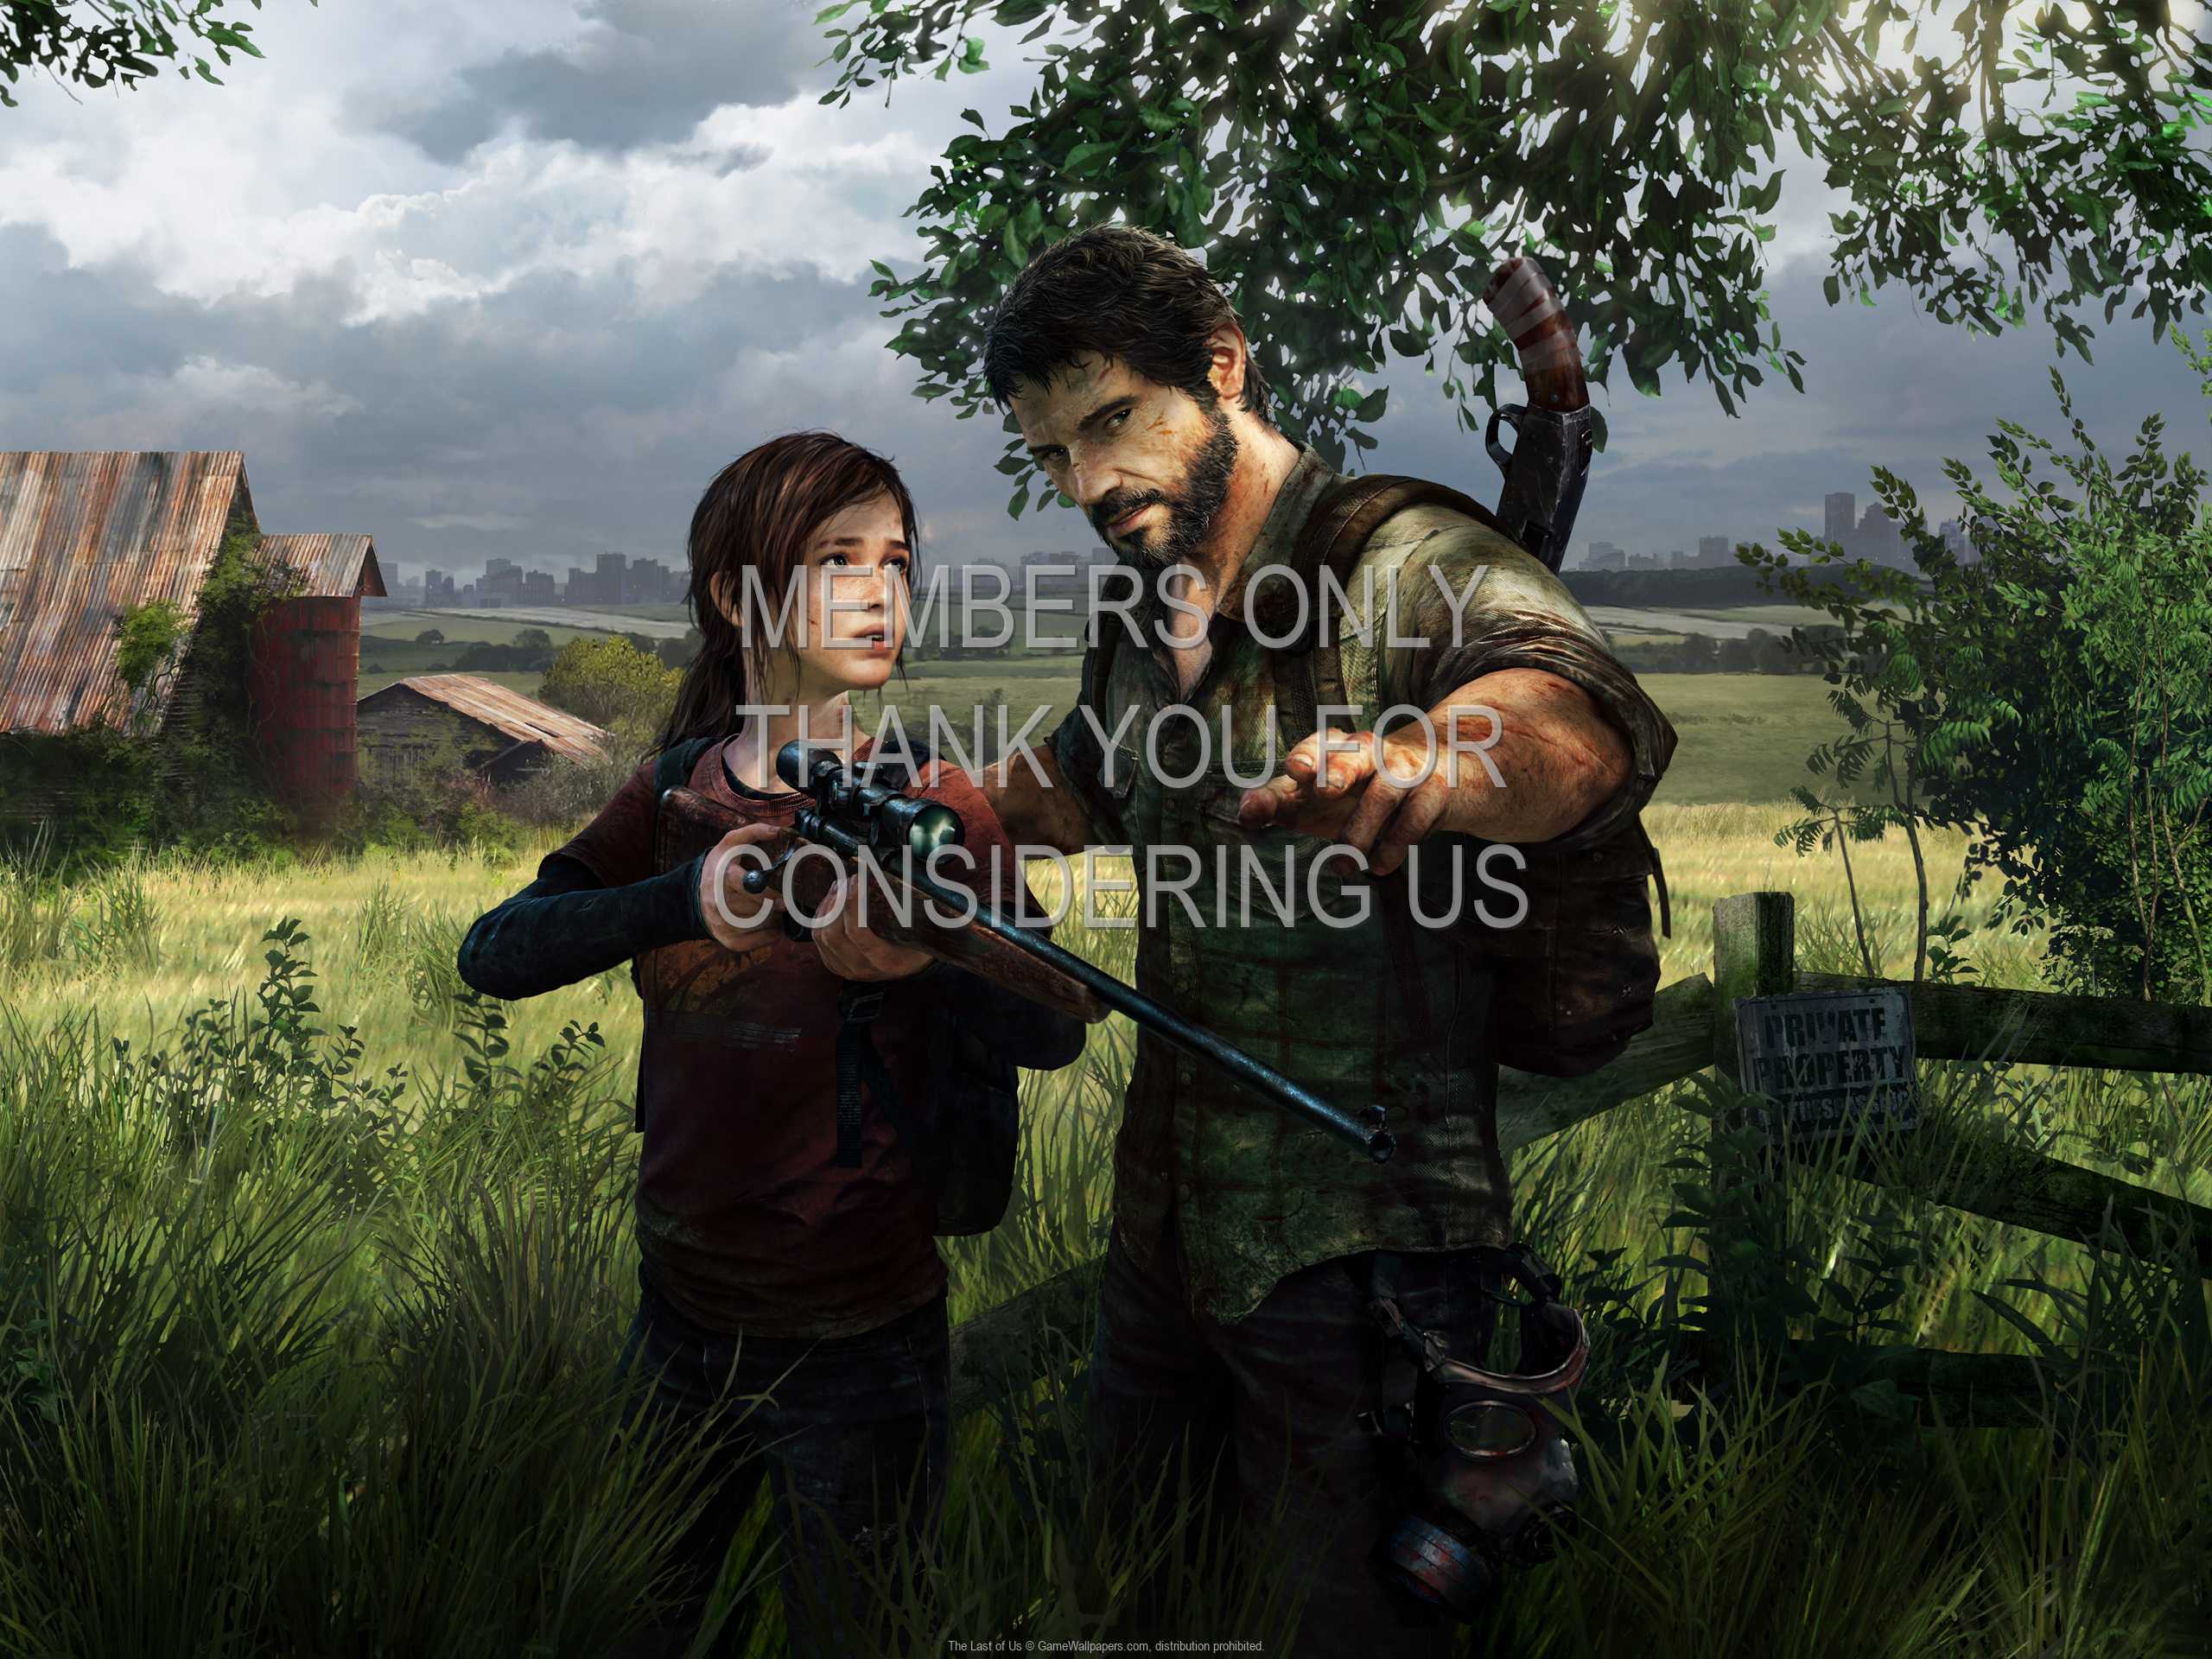 the last of us wallpapers or desktop backgrounds